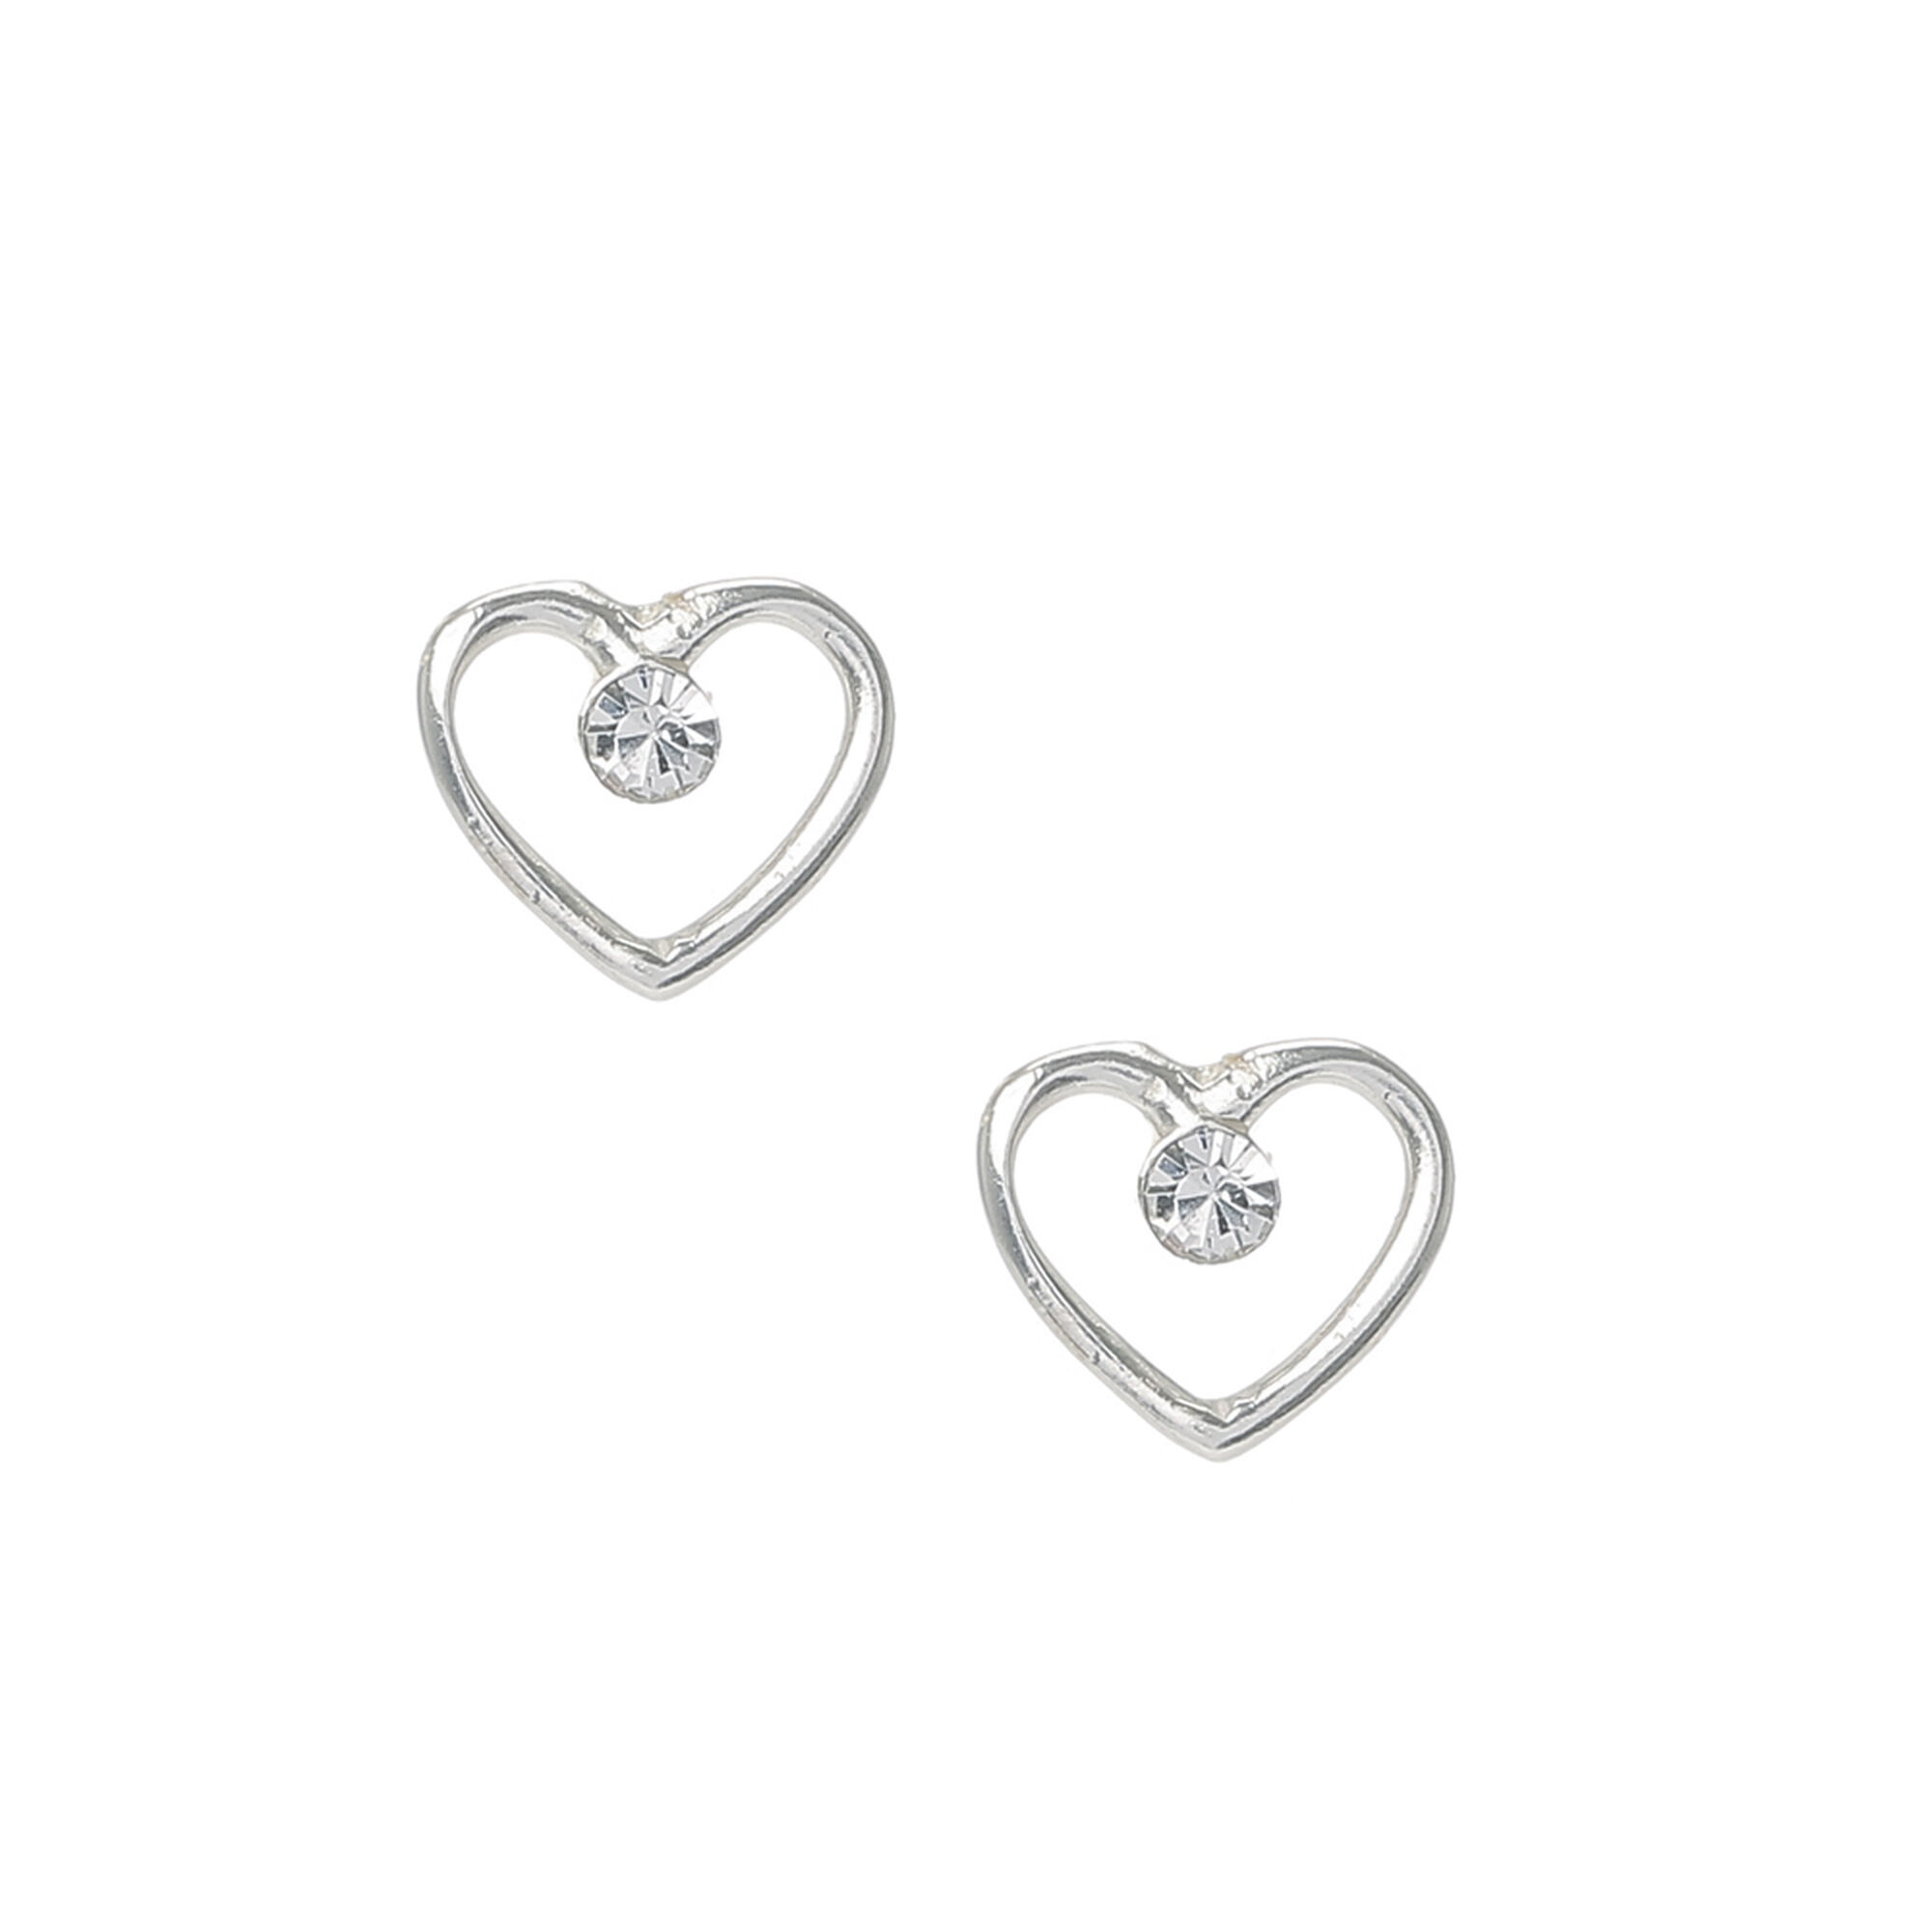 View Claires Heart Outline Stud Earrings Silver information